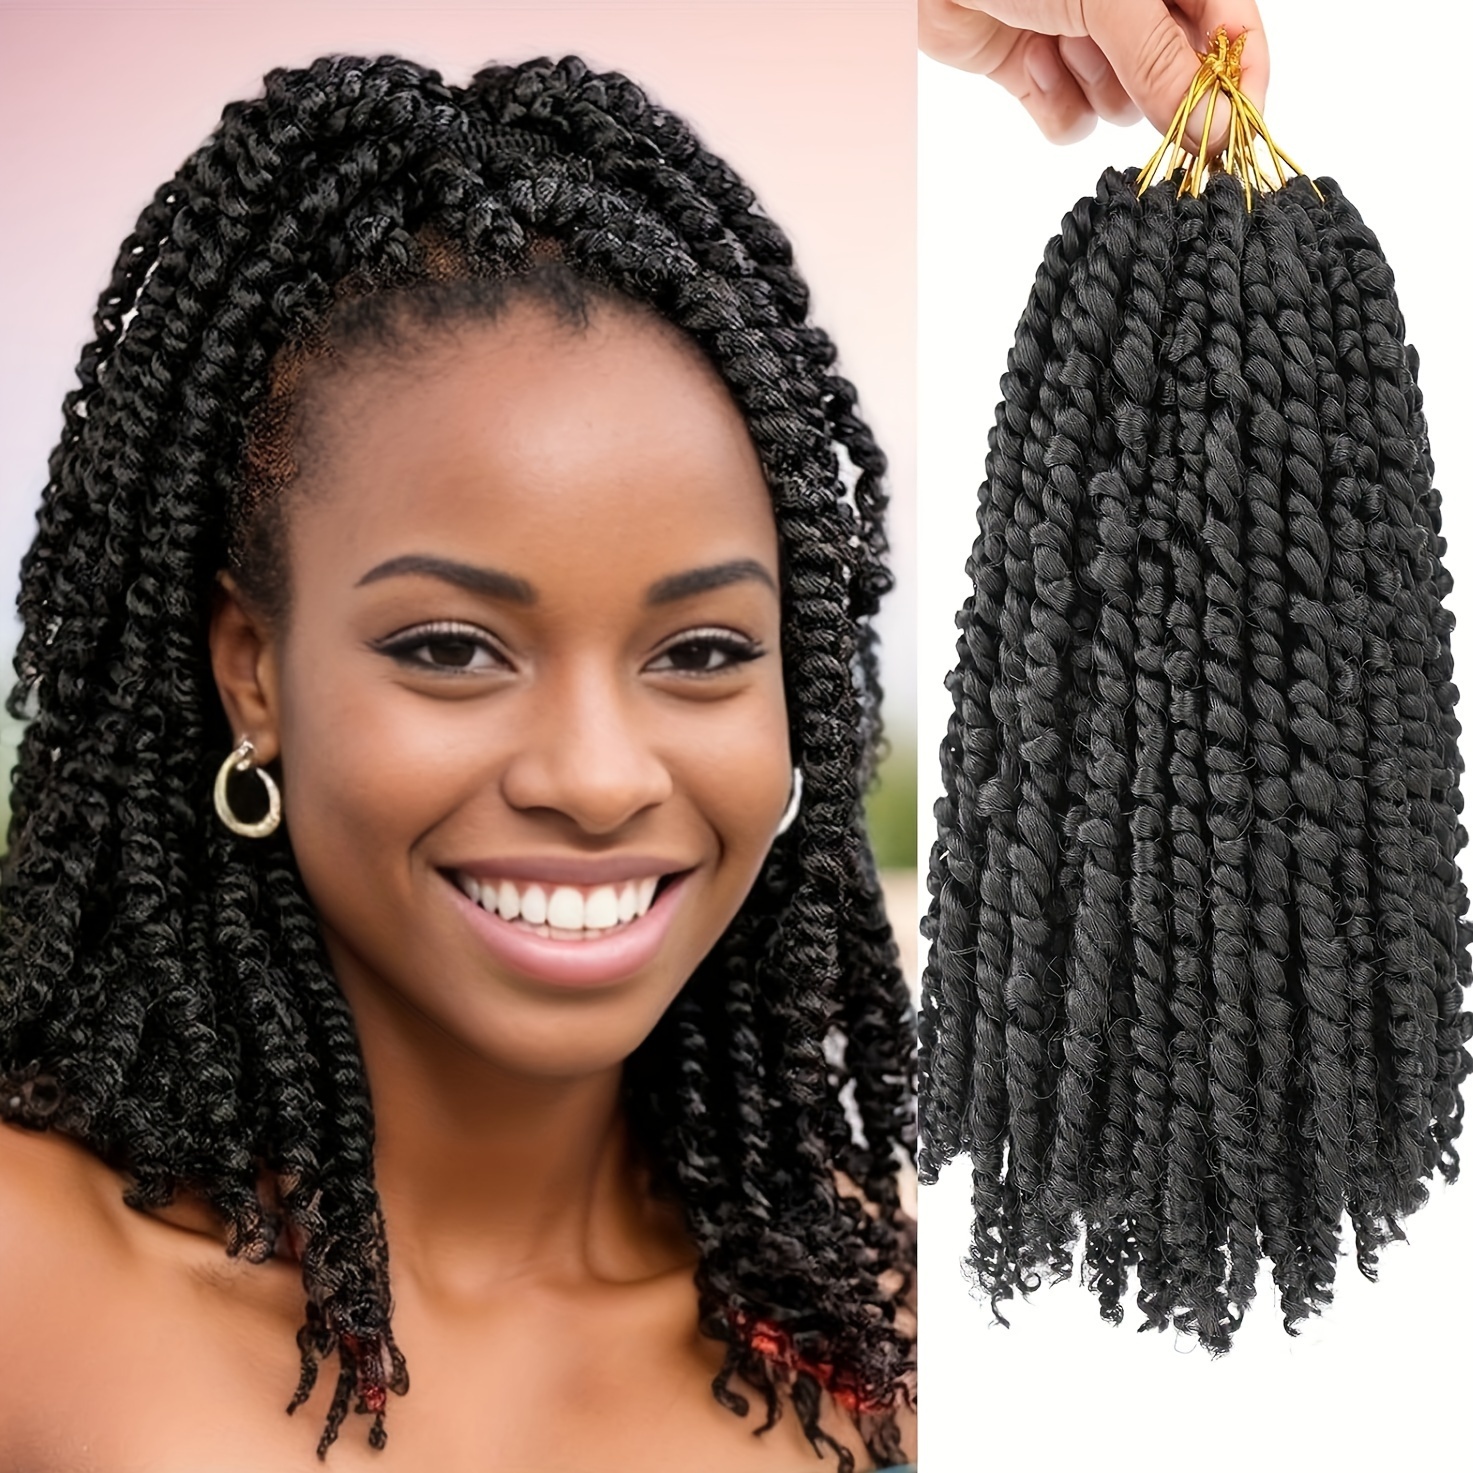 Passion Twist Hair 10 Inch- 8 Packs Passion Twist Crochet Hair Water Wave  Crochet Hair for